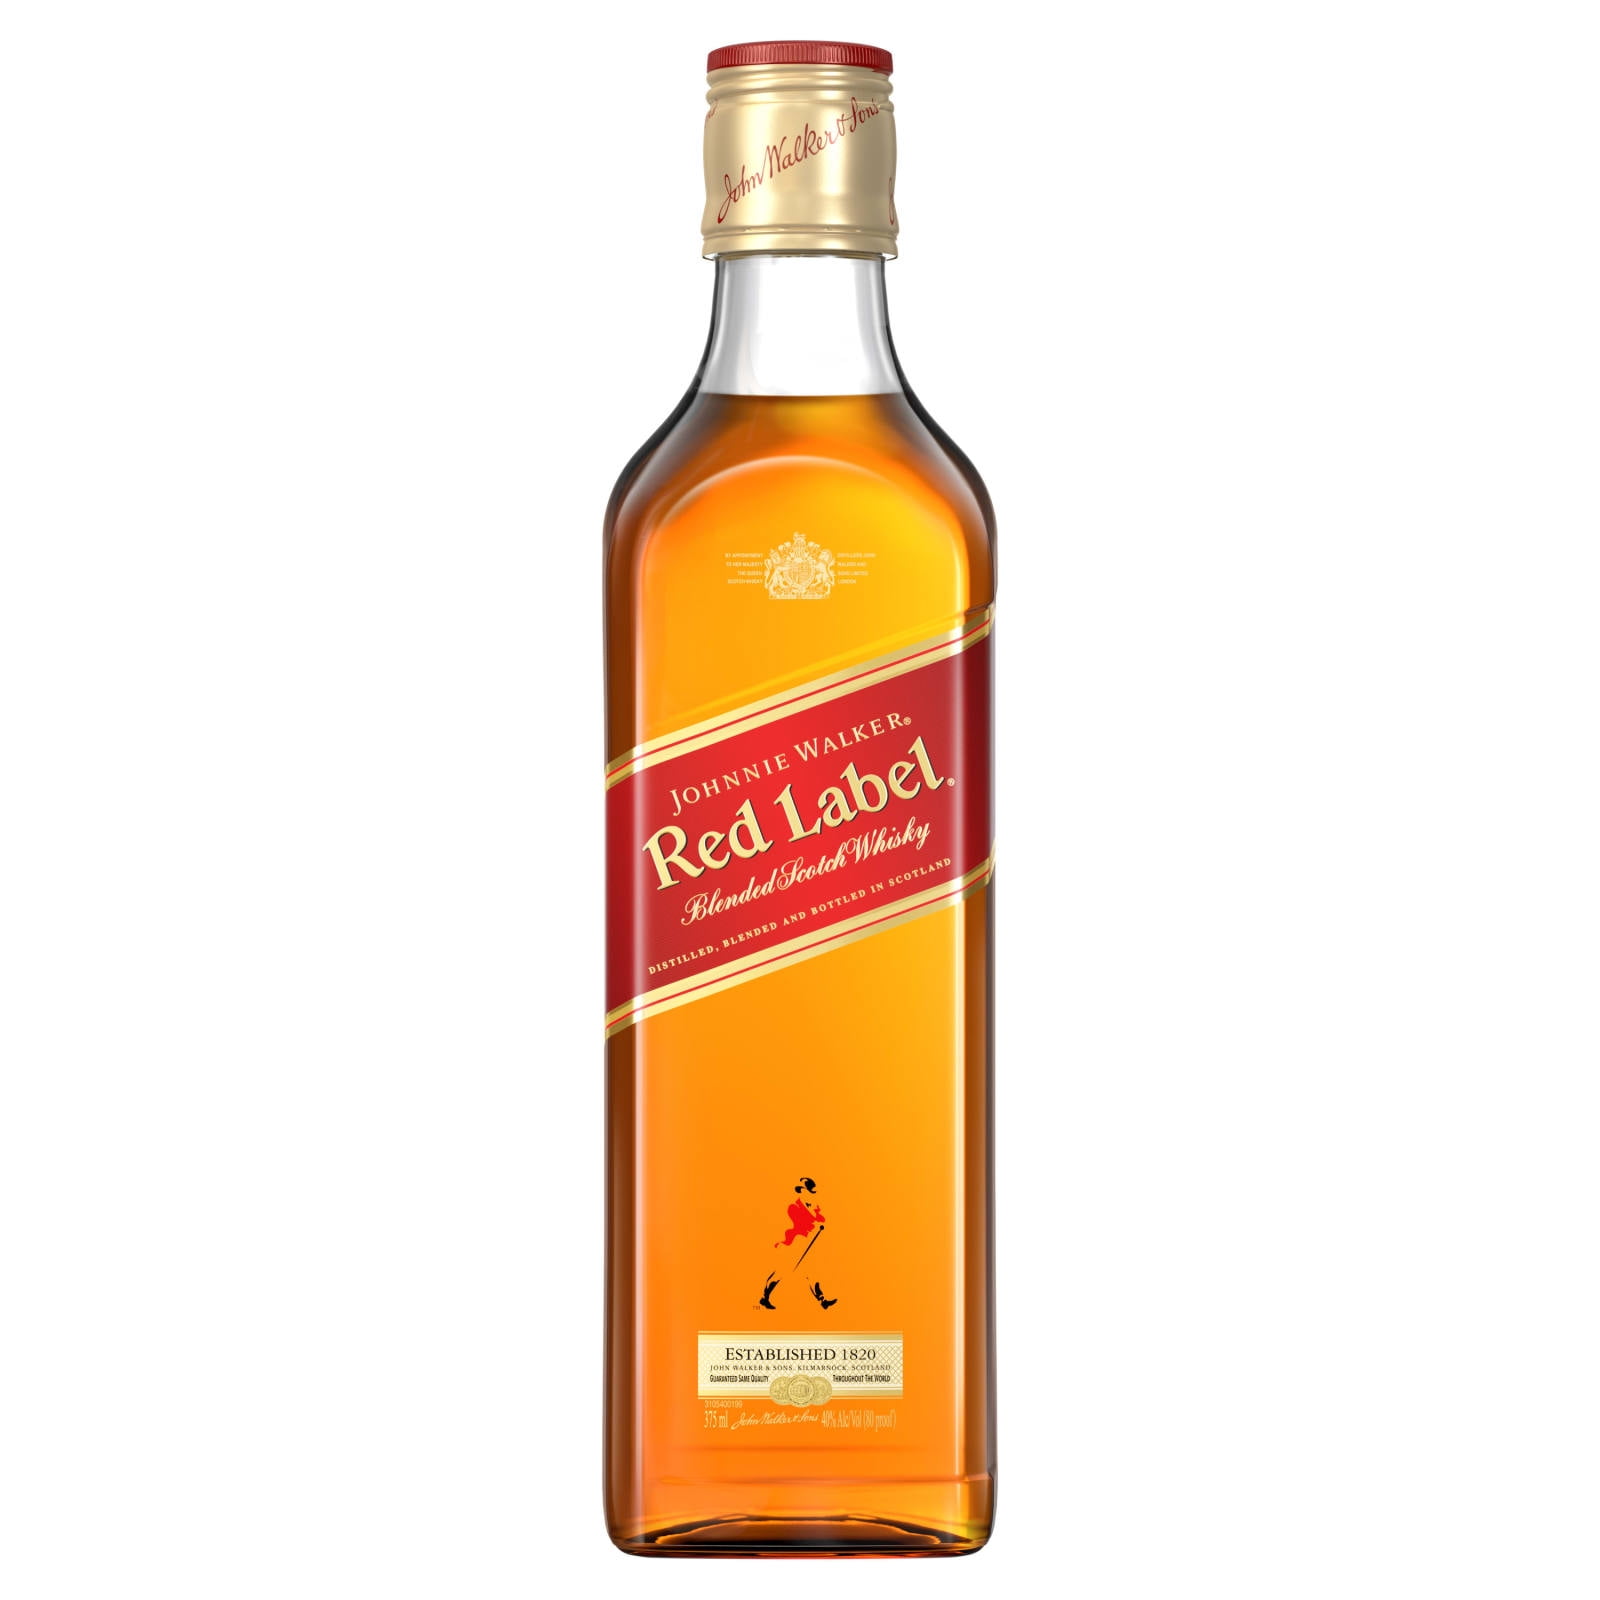 Blended (80 Johnnie Scotch Red Label ml Whisky, 375 Walker Proof)